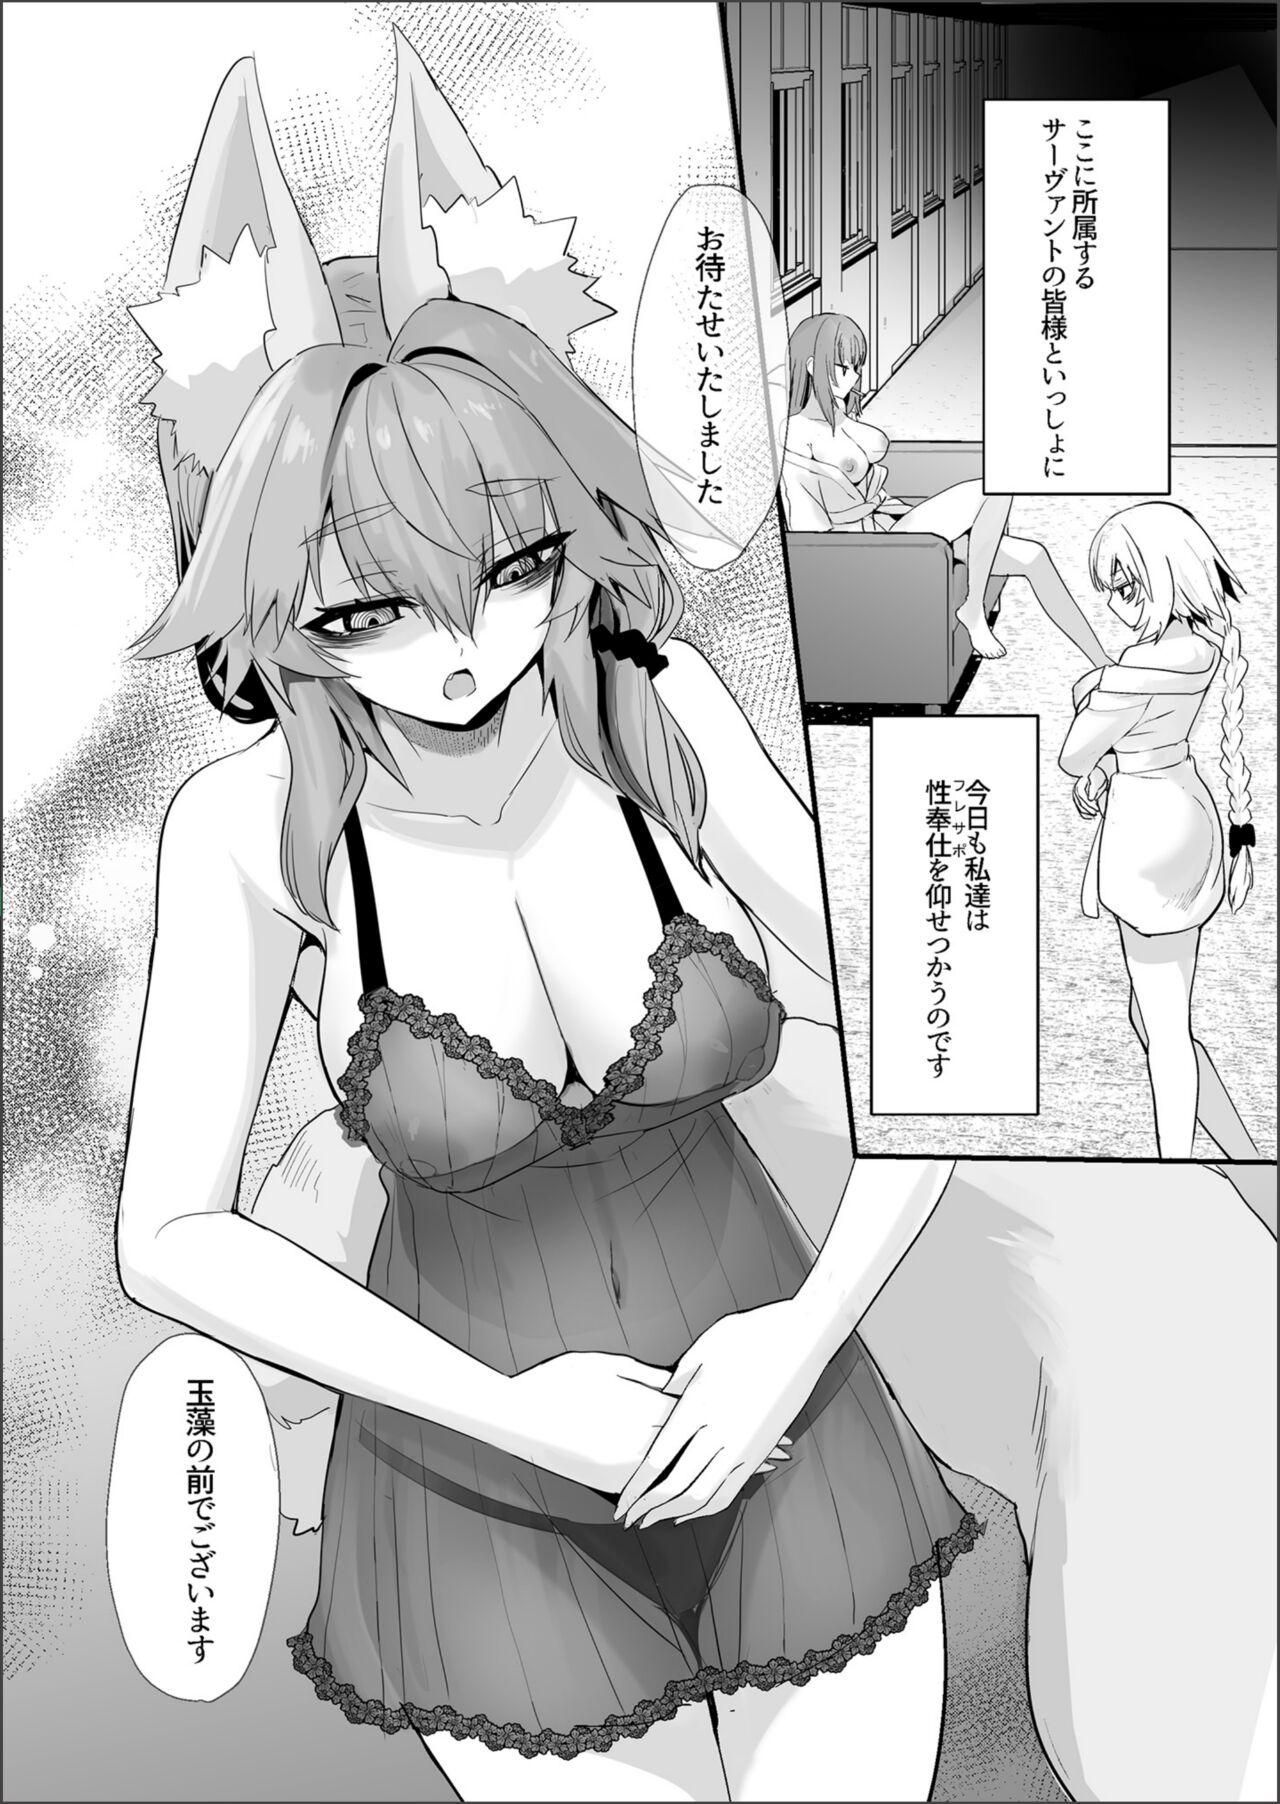 Story Dead eyes sex woker Tamamo 2 - Fate grand order Latino - Page 4